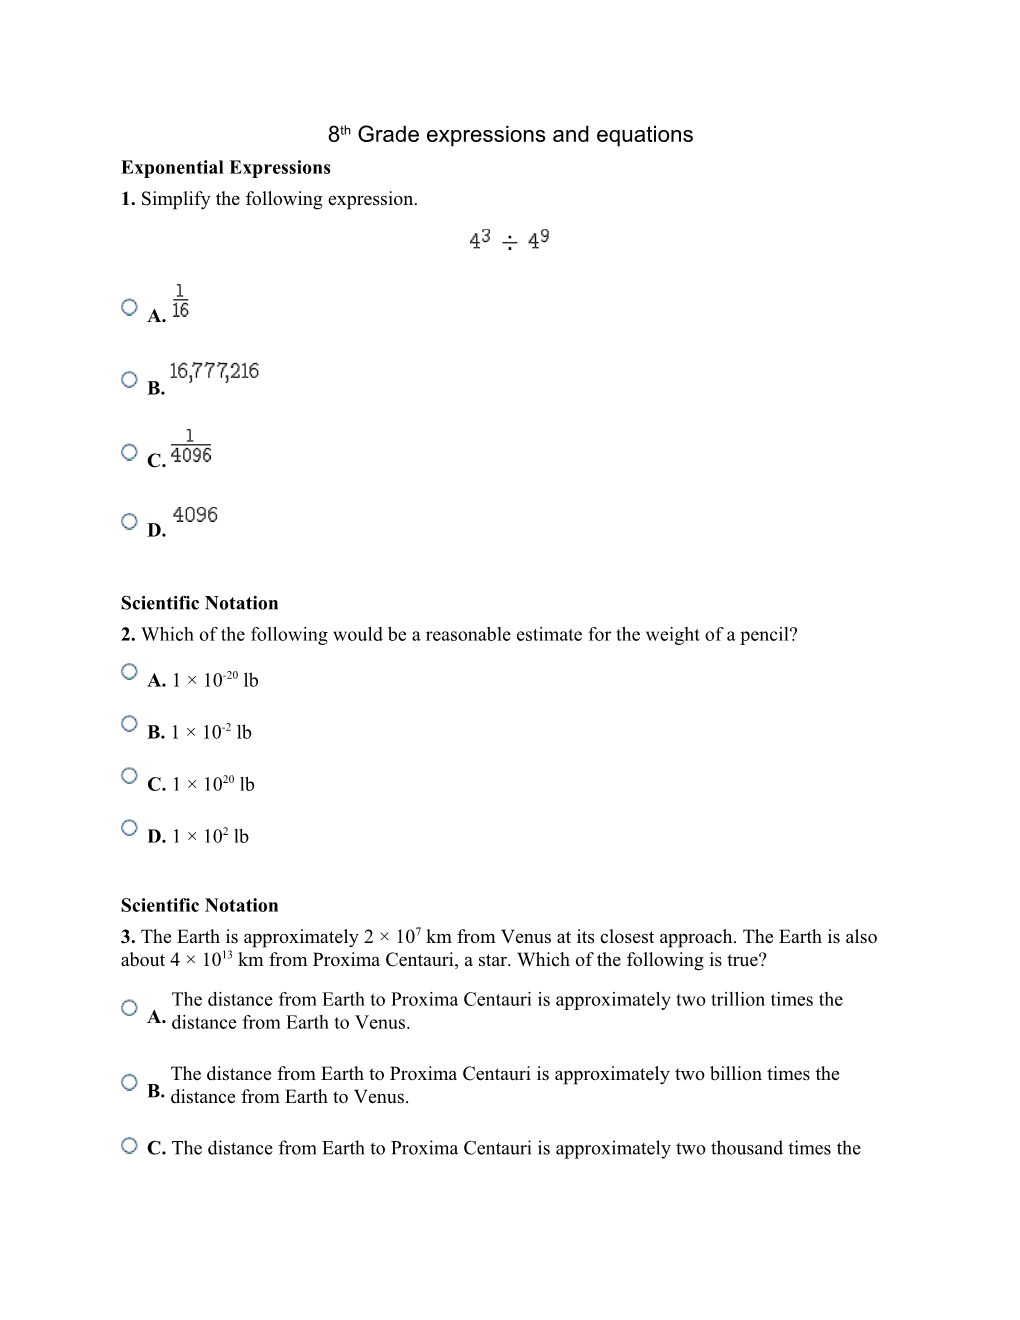 8Th Grade Expressions and Equations